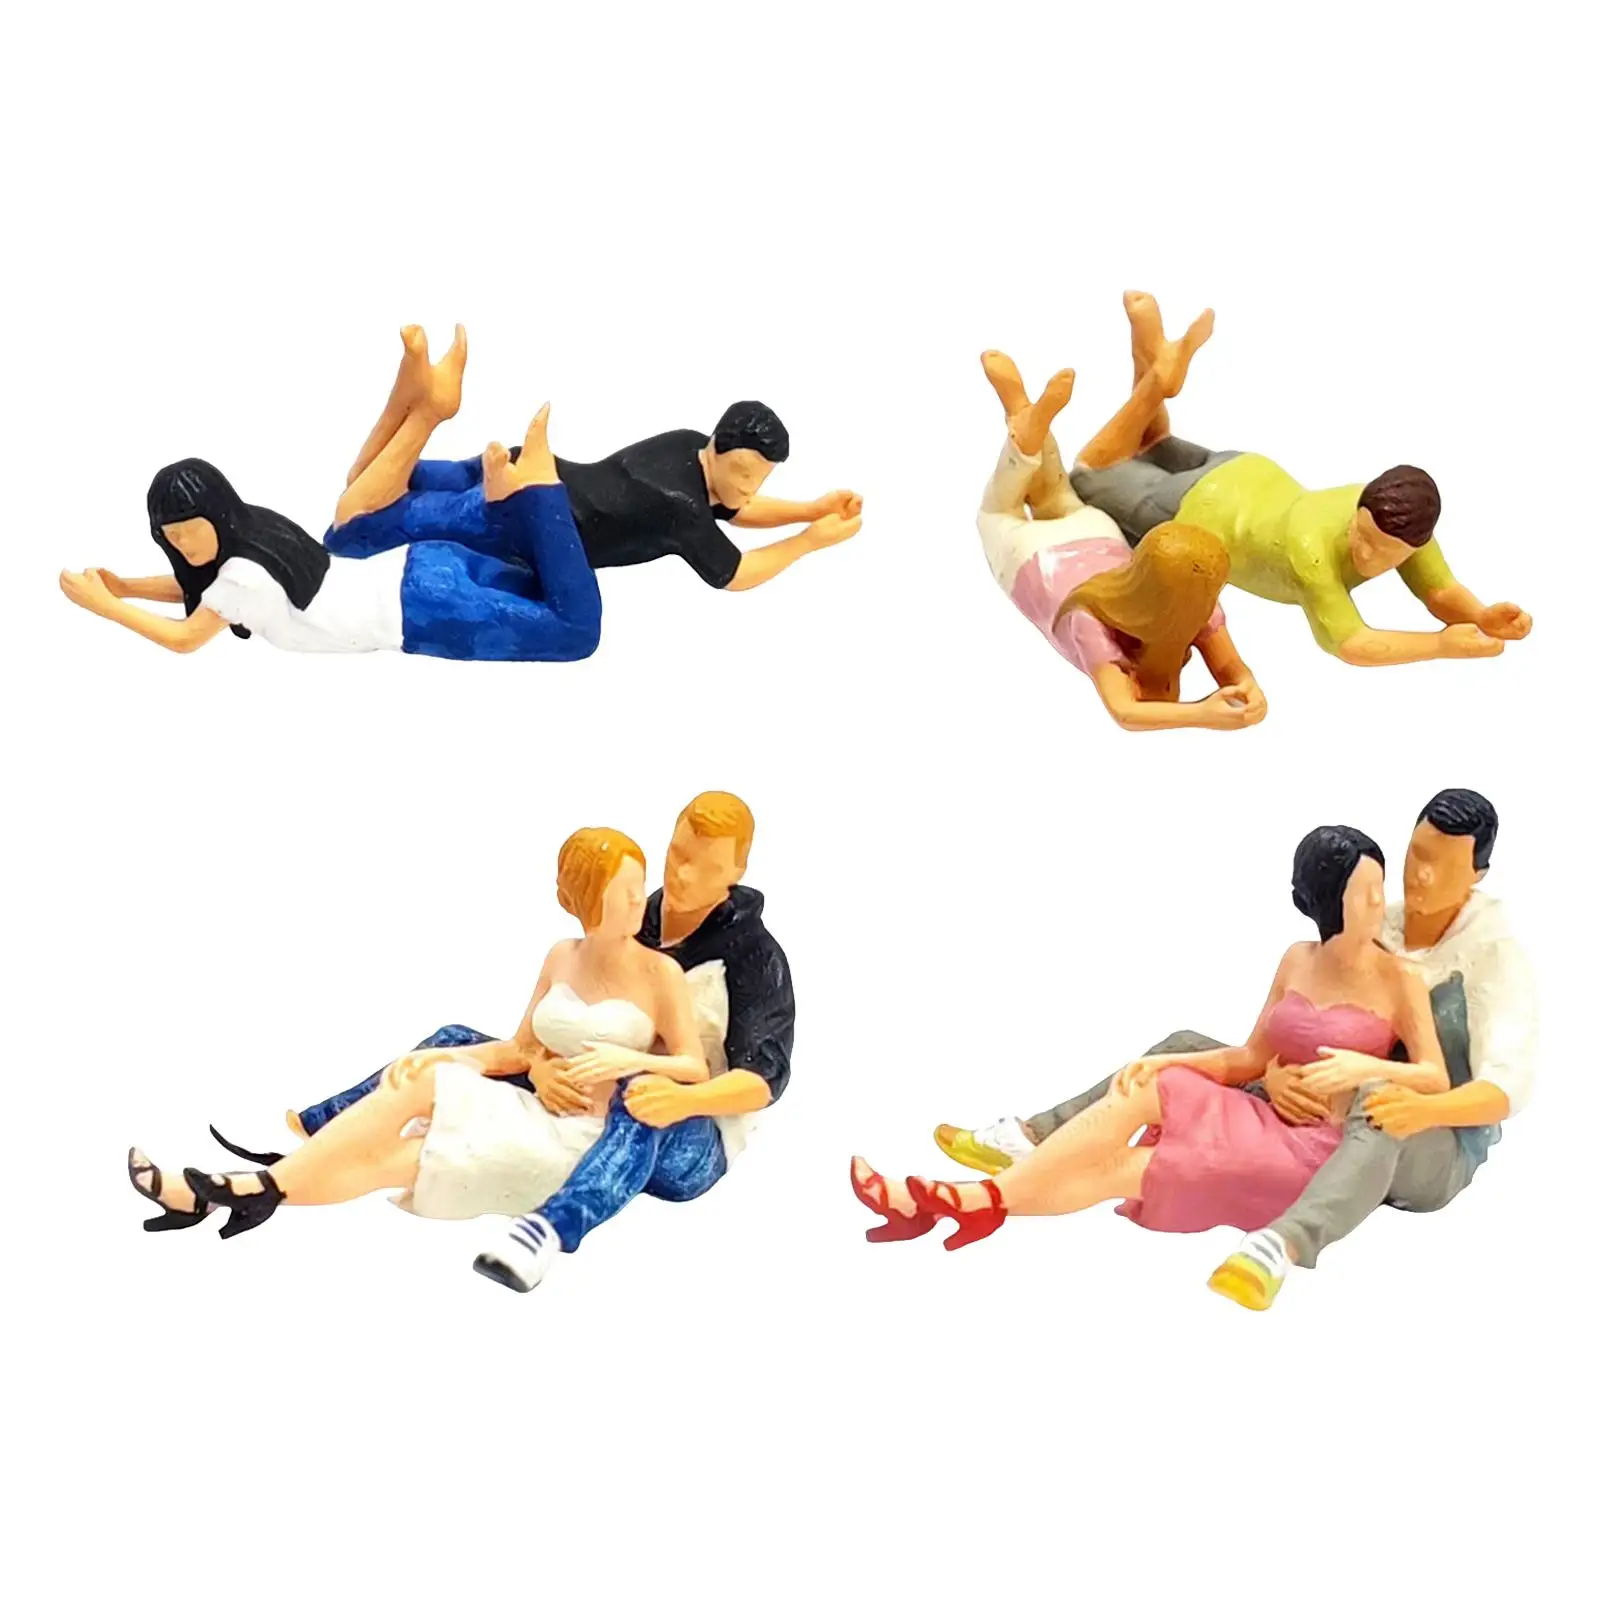 Resin 1:64 Couple Figure Diorama Scenery DIY Projects S Scale Miniature Fairy Garden Train Railway Movie Props Collections Decor